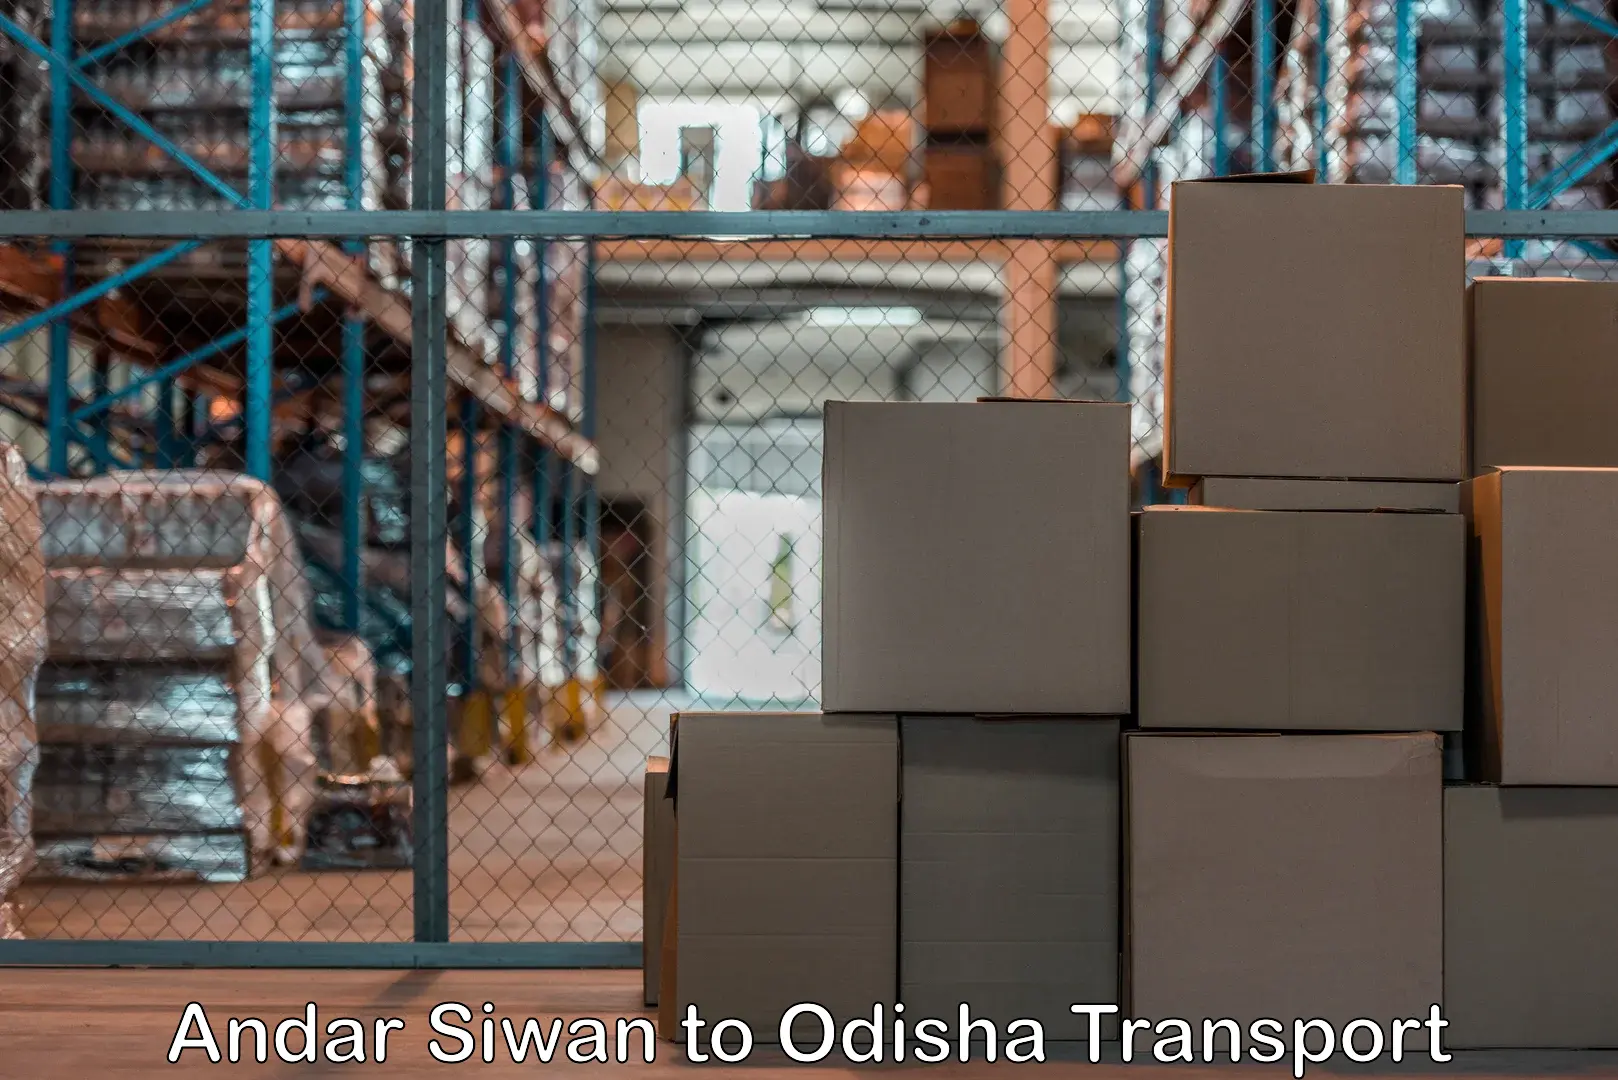 Truck transport companies in India in Andar Siwan to Khaprakhol